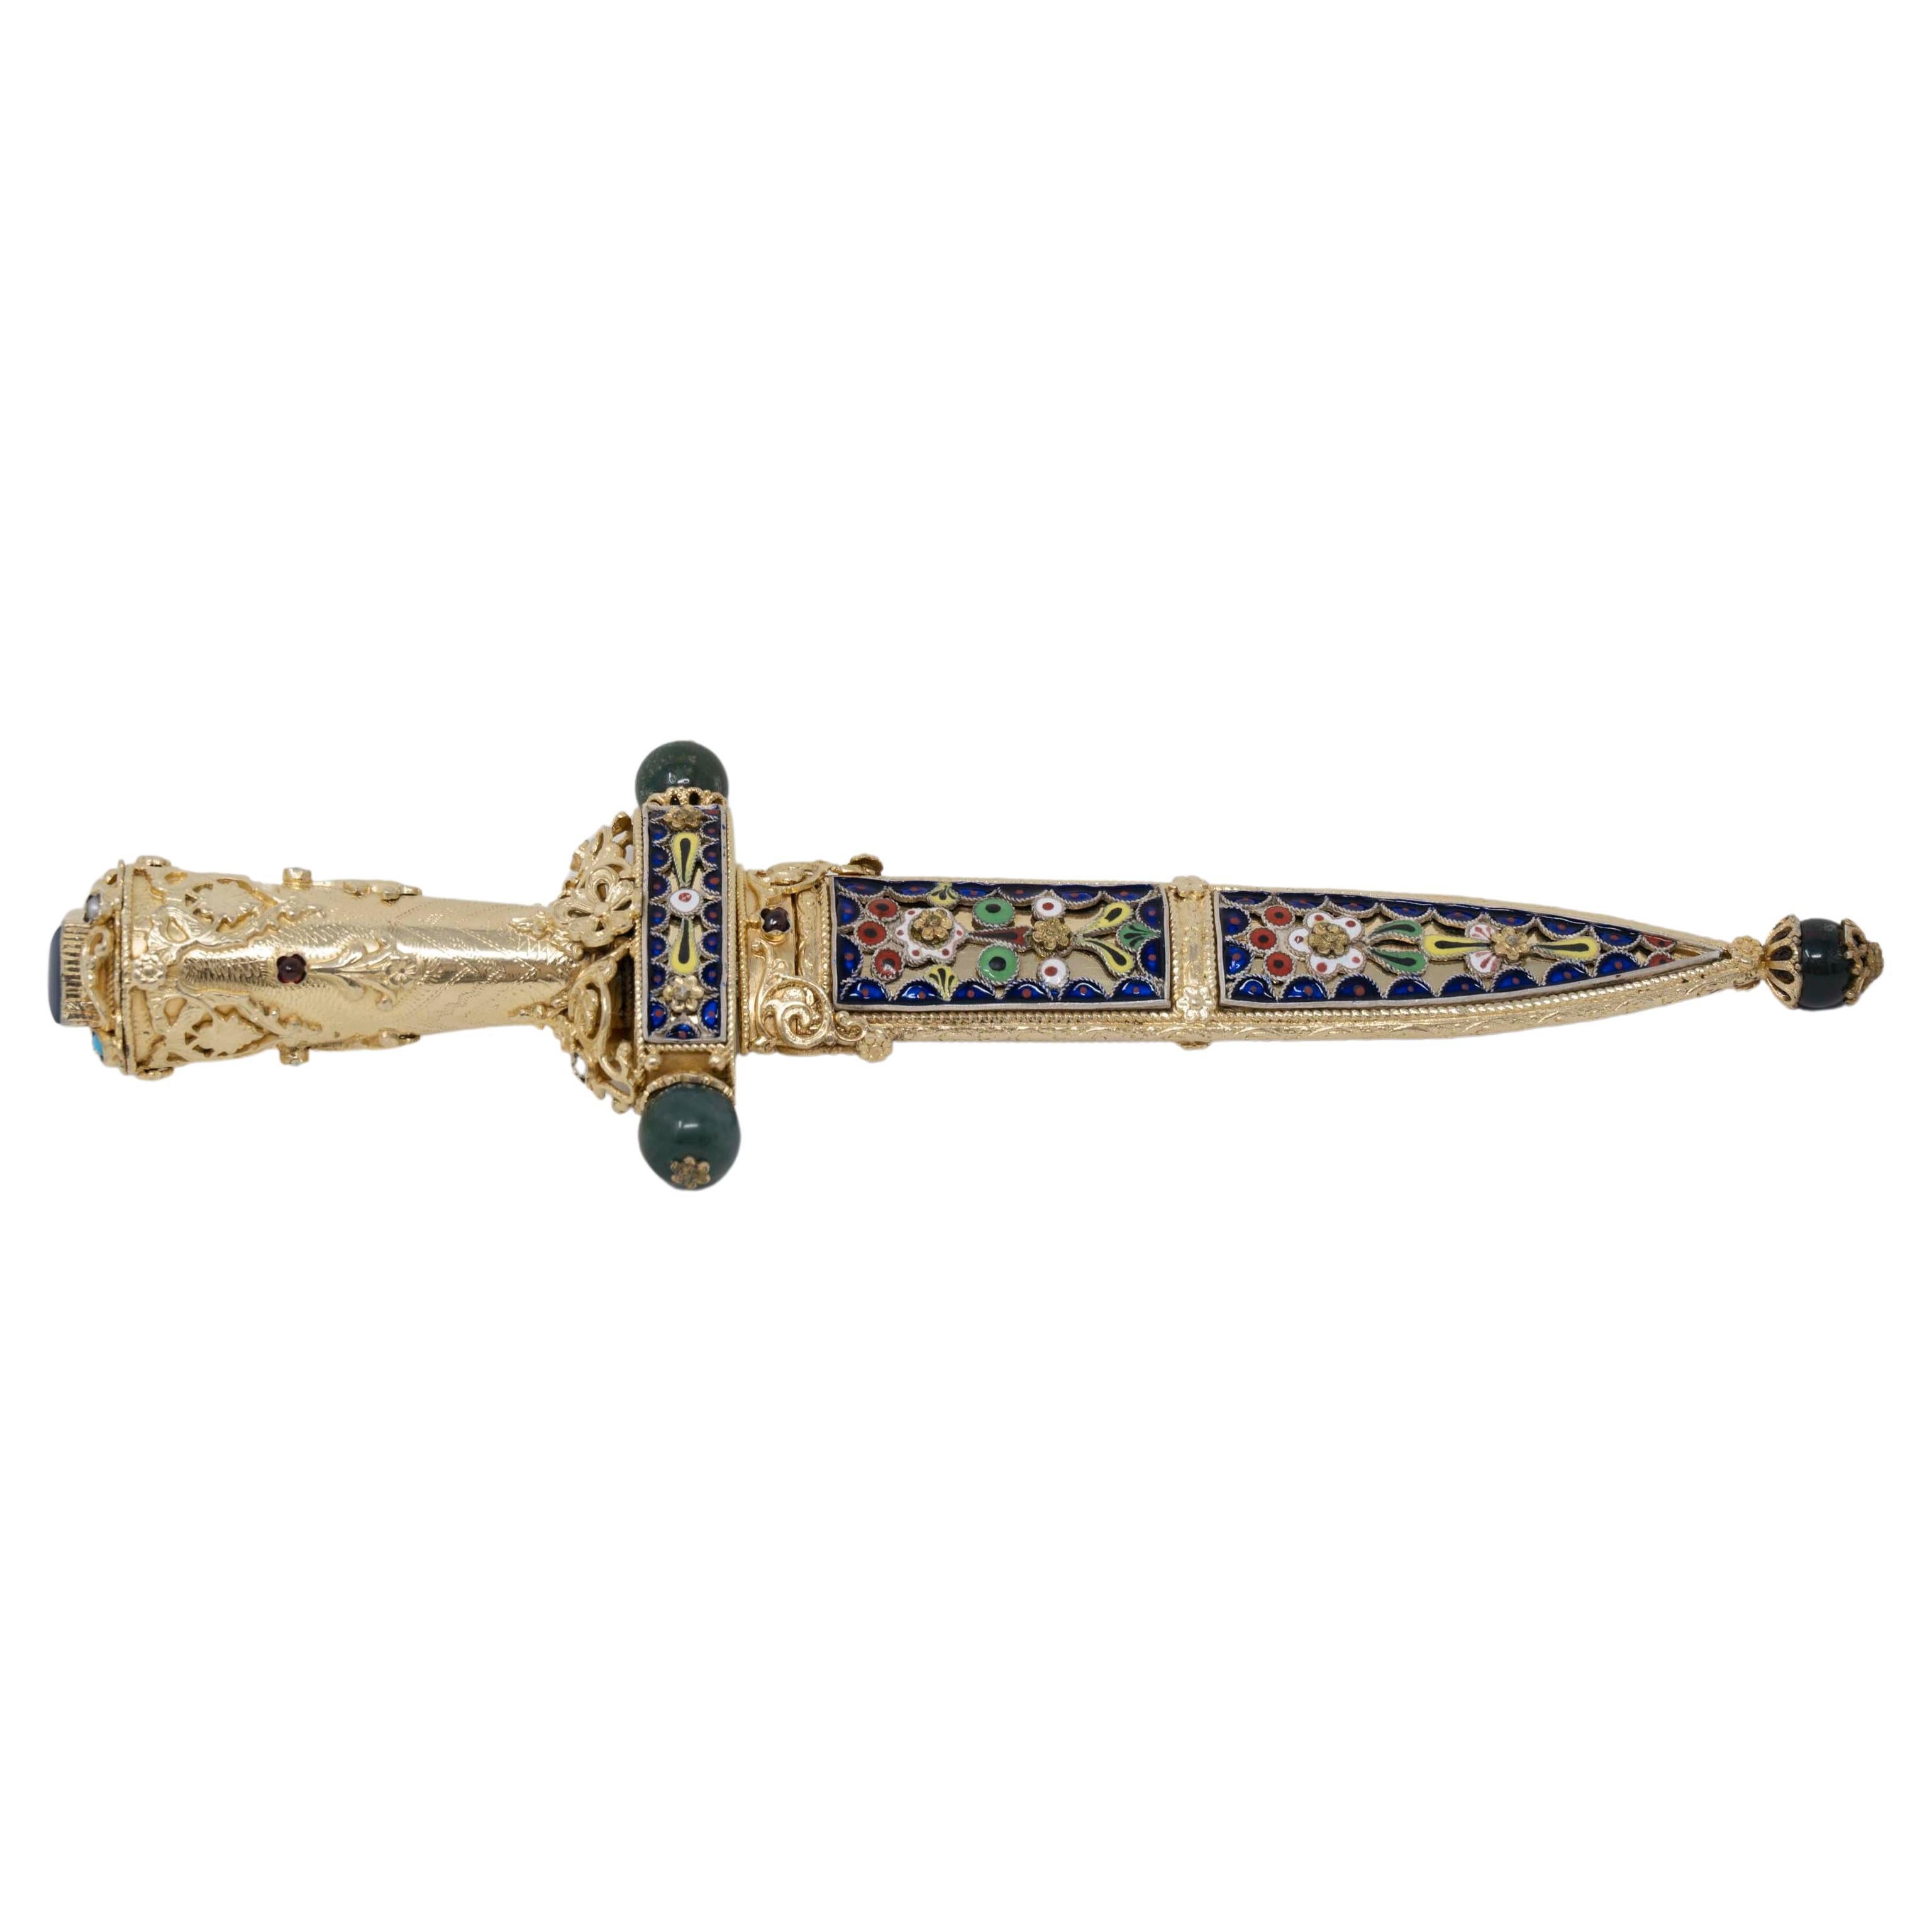 Faberge Style Jewel Encrusted 925 Silver Letter Opener